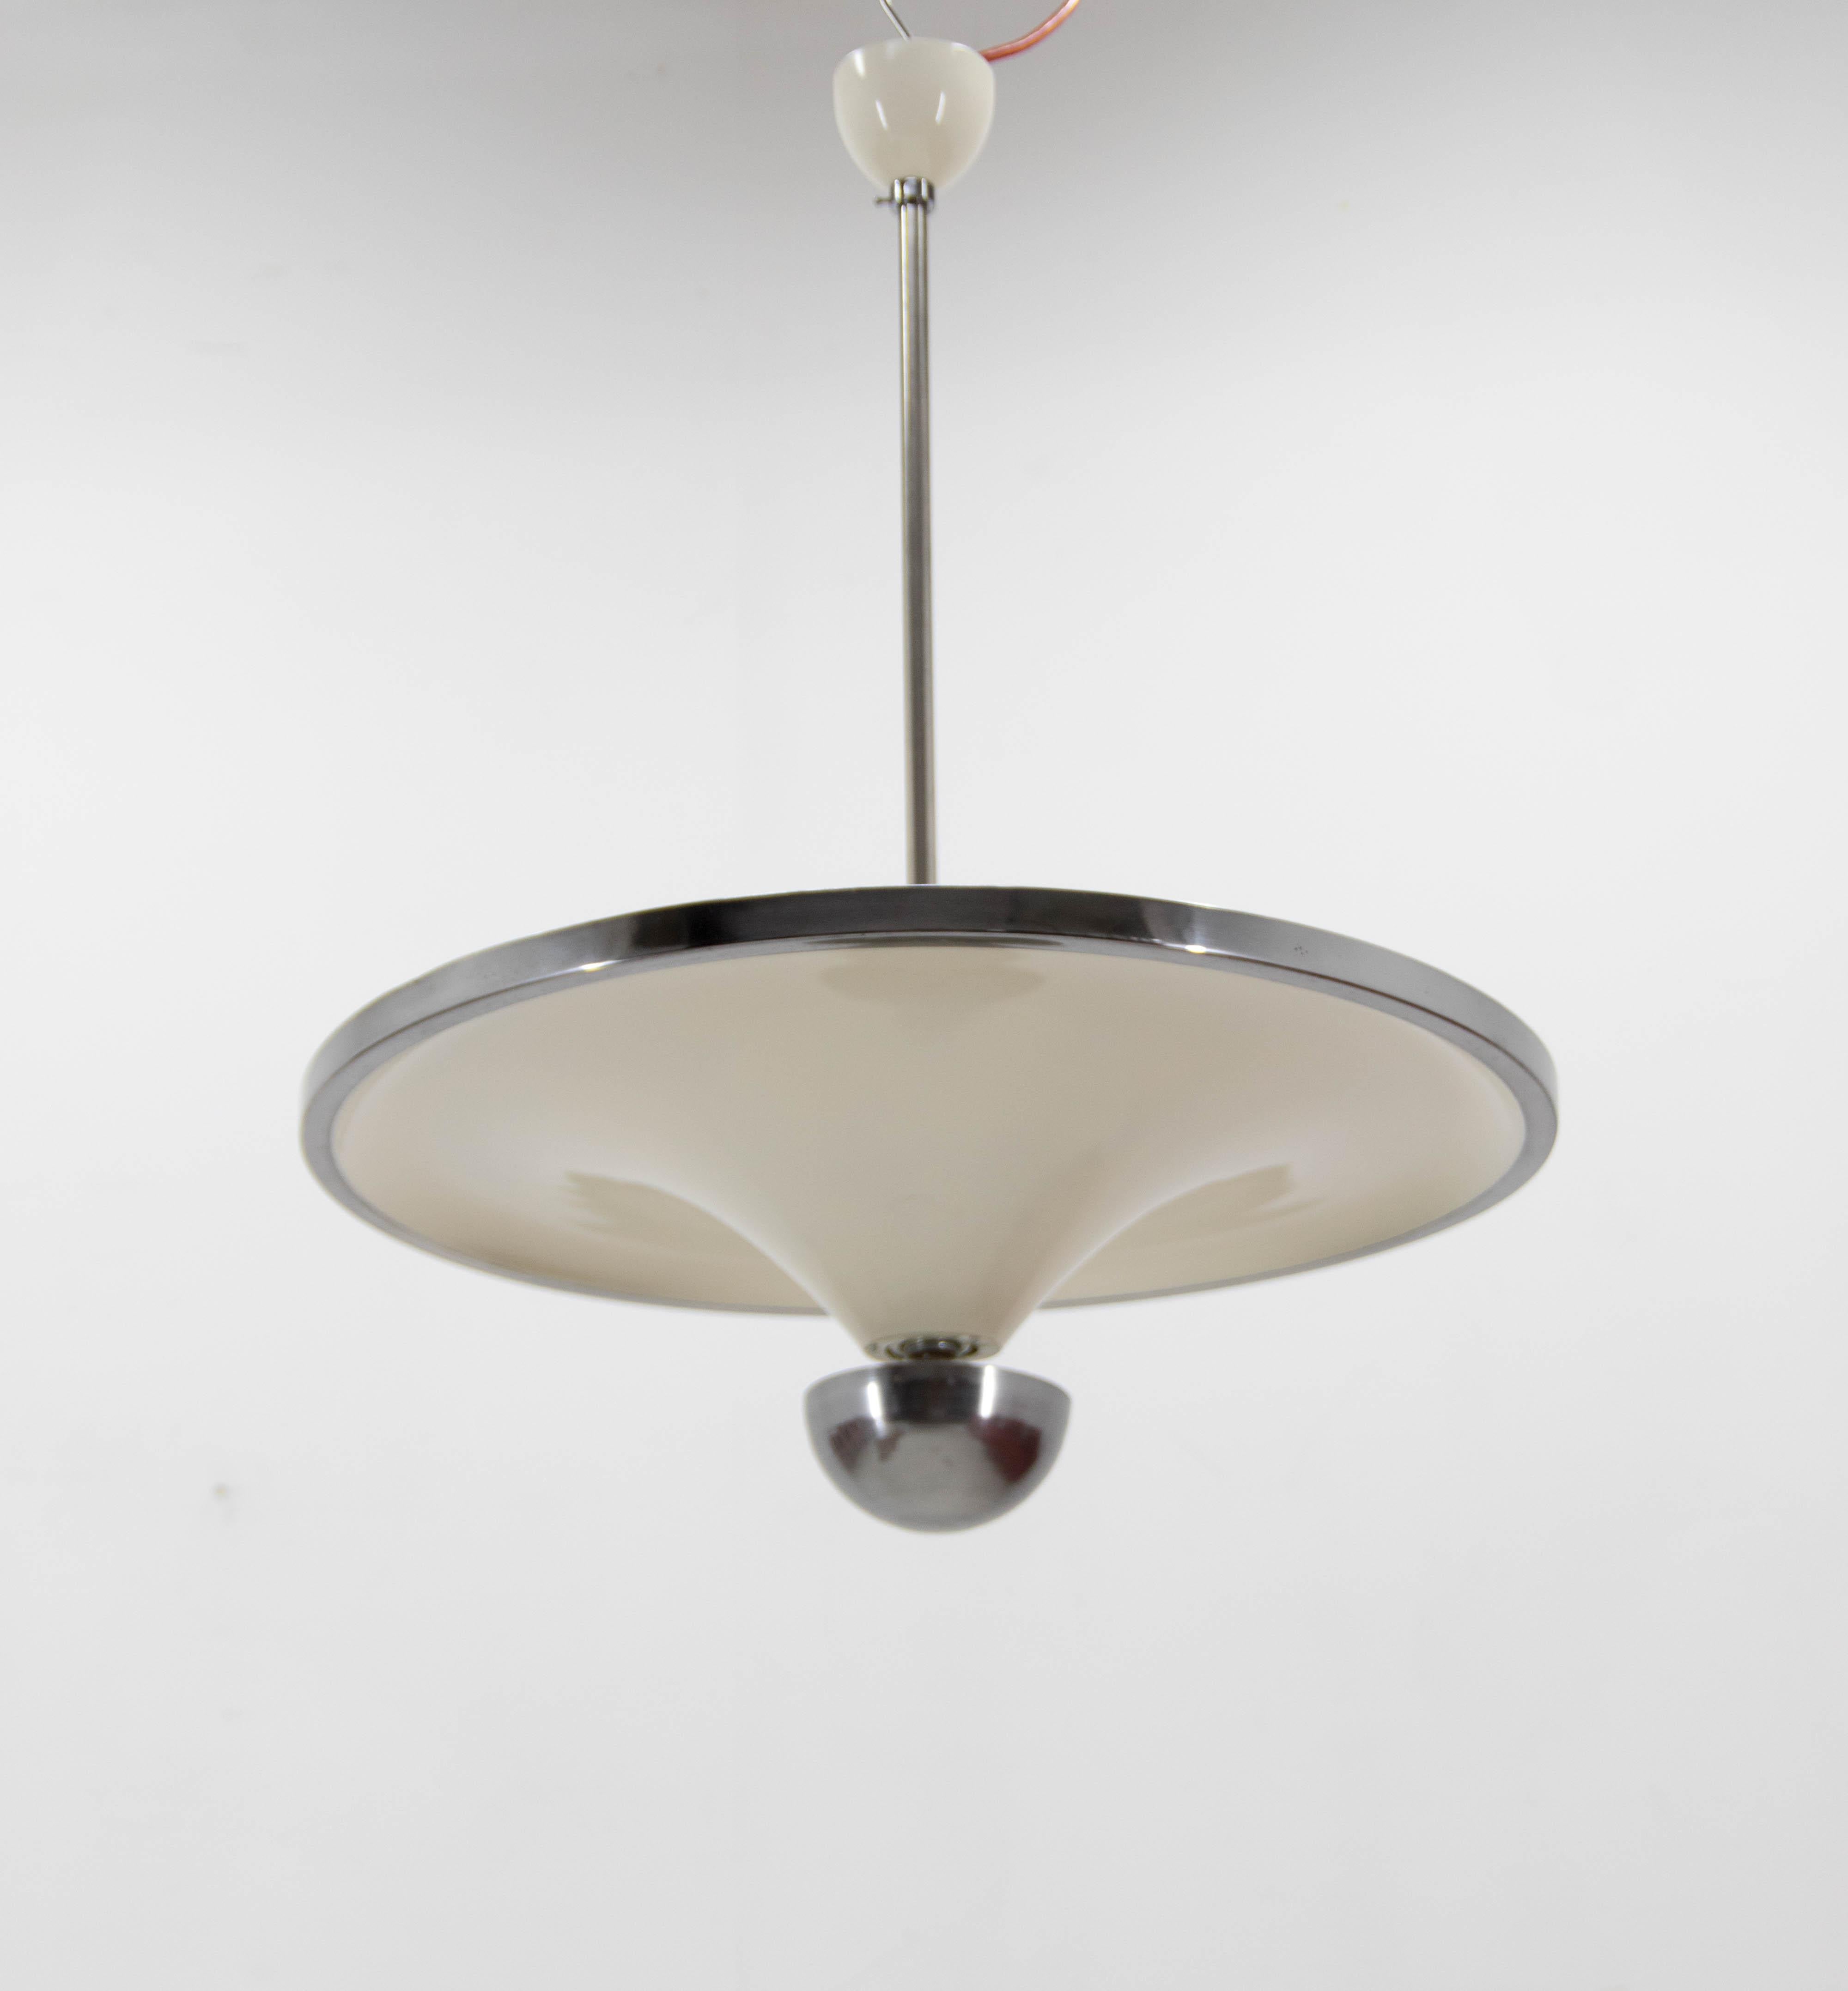 Czech Rare Bauhaus Chandelier with Indirect Light by IAS, 1920s For Sale